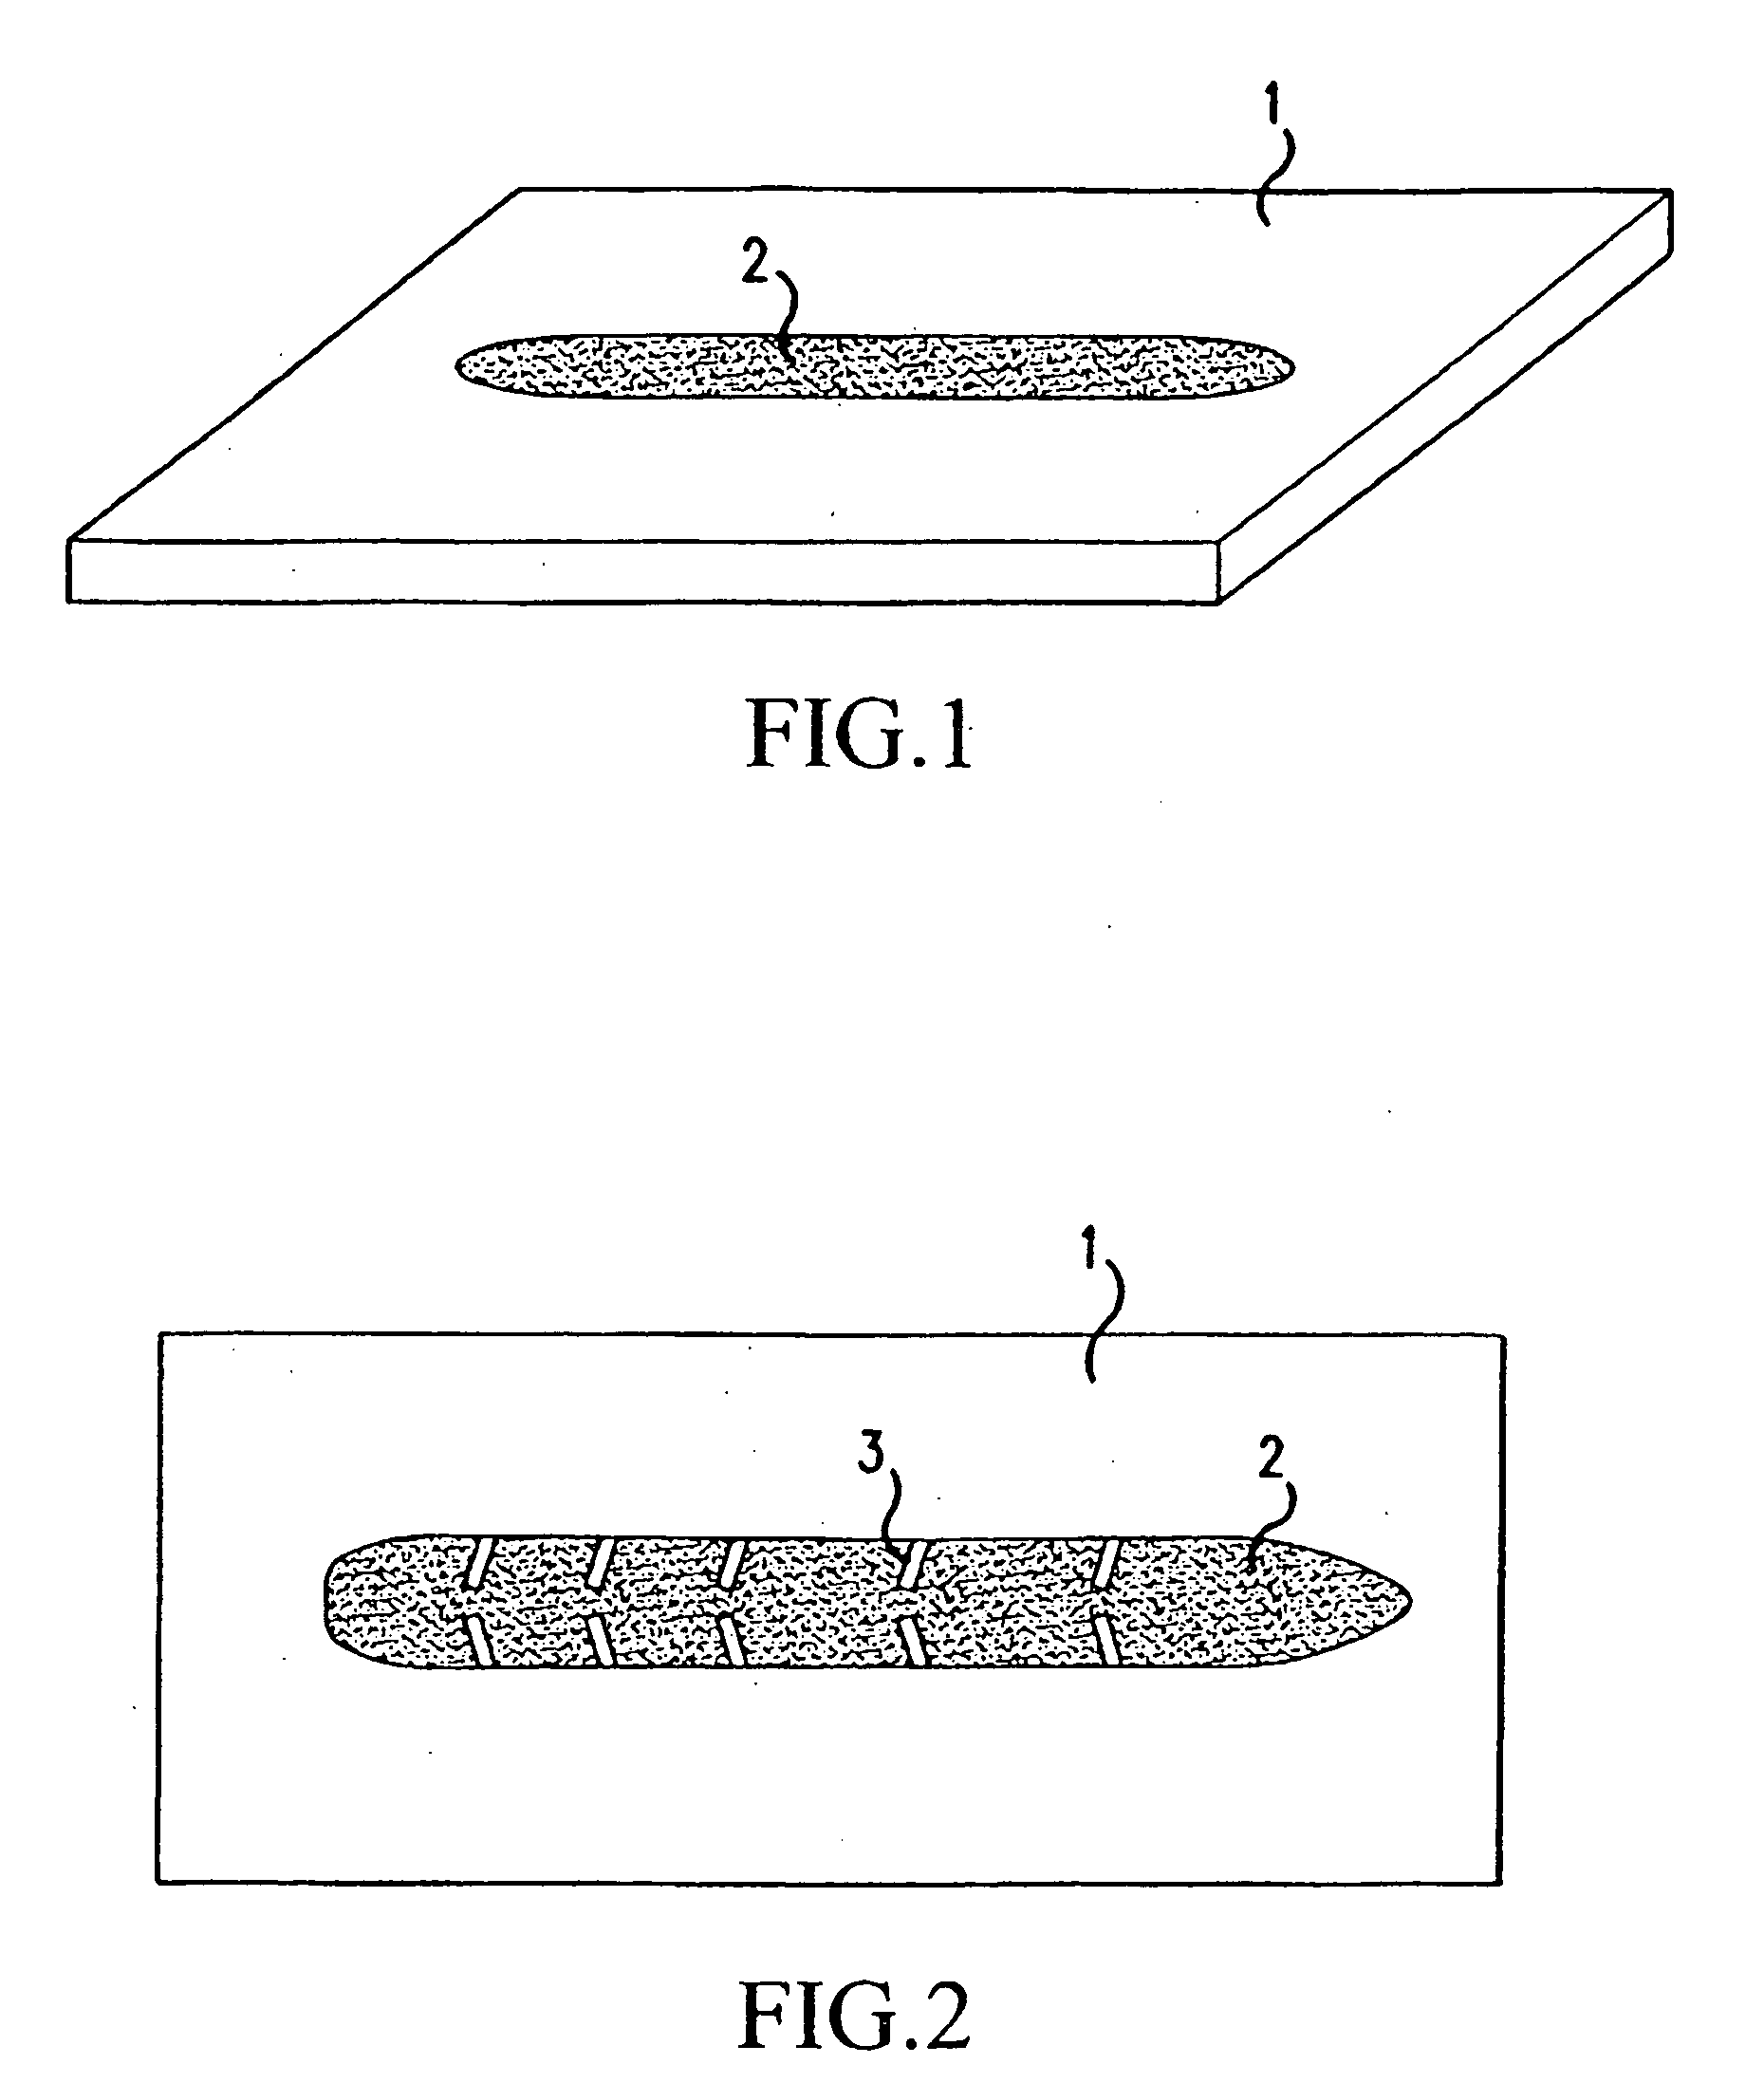 Weld Joint Formed with Stainless Steel-Based Weld Metal for Welding a Zinc-Based Alloy Coated Steel Sheet